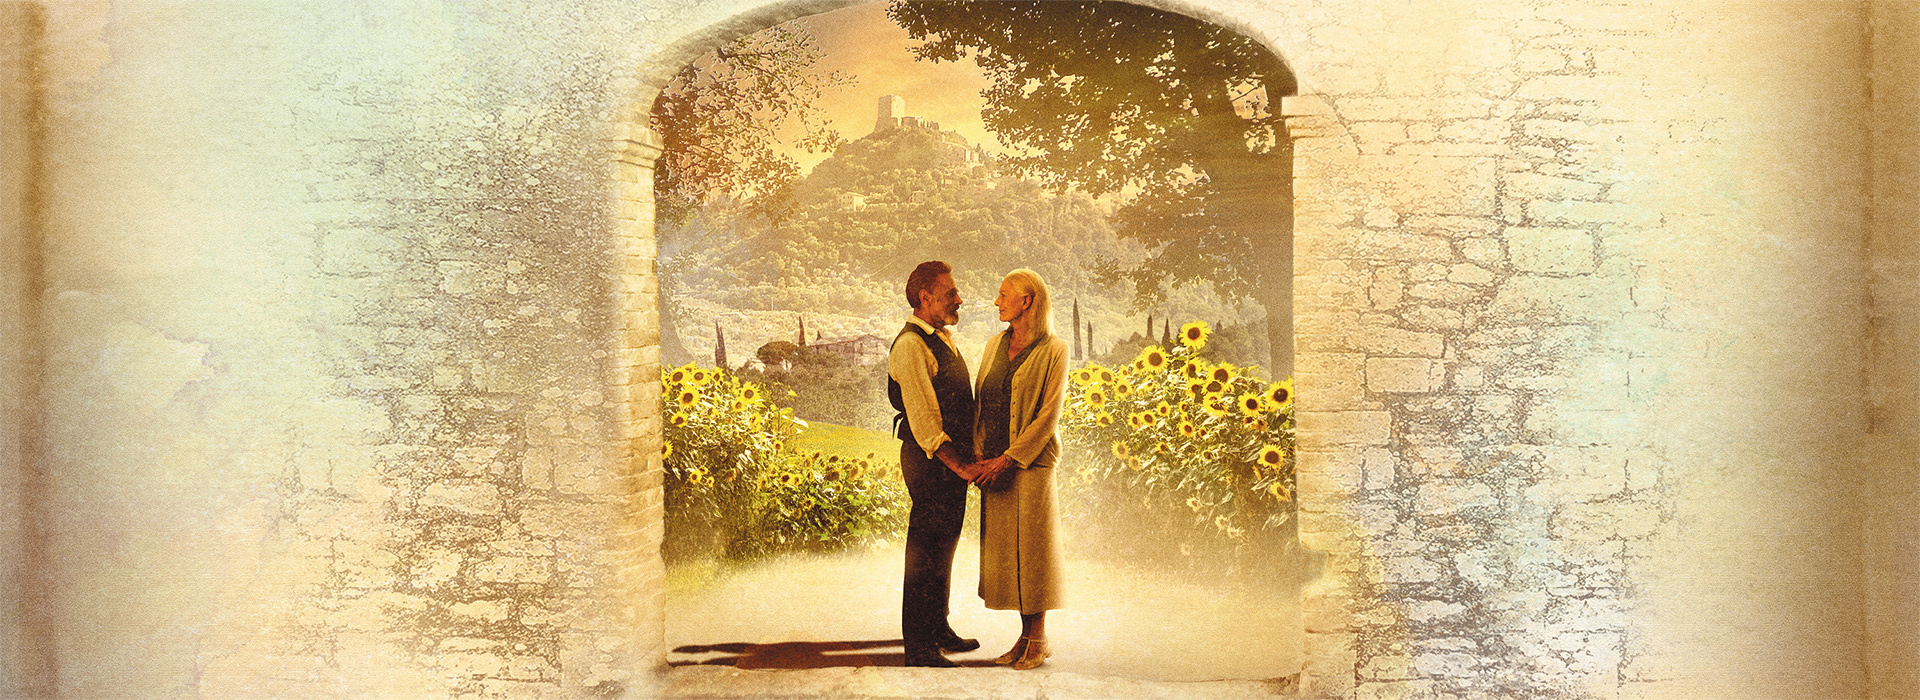 Movie poster Letters to Juliet